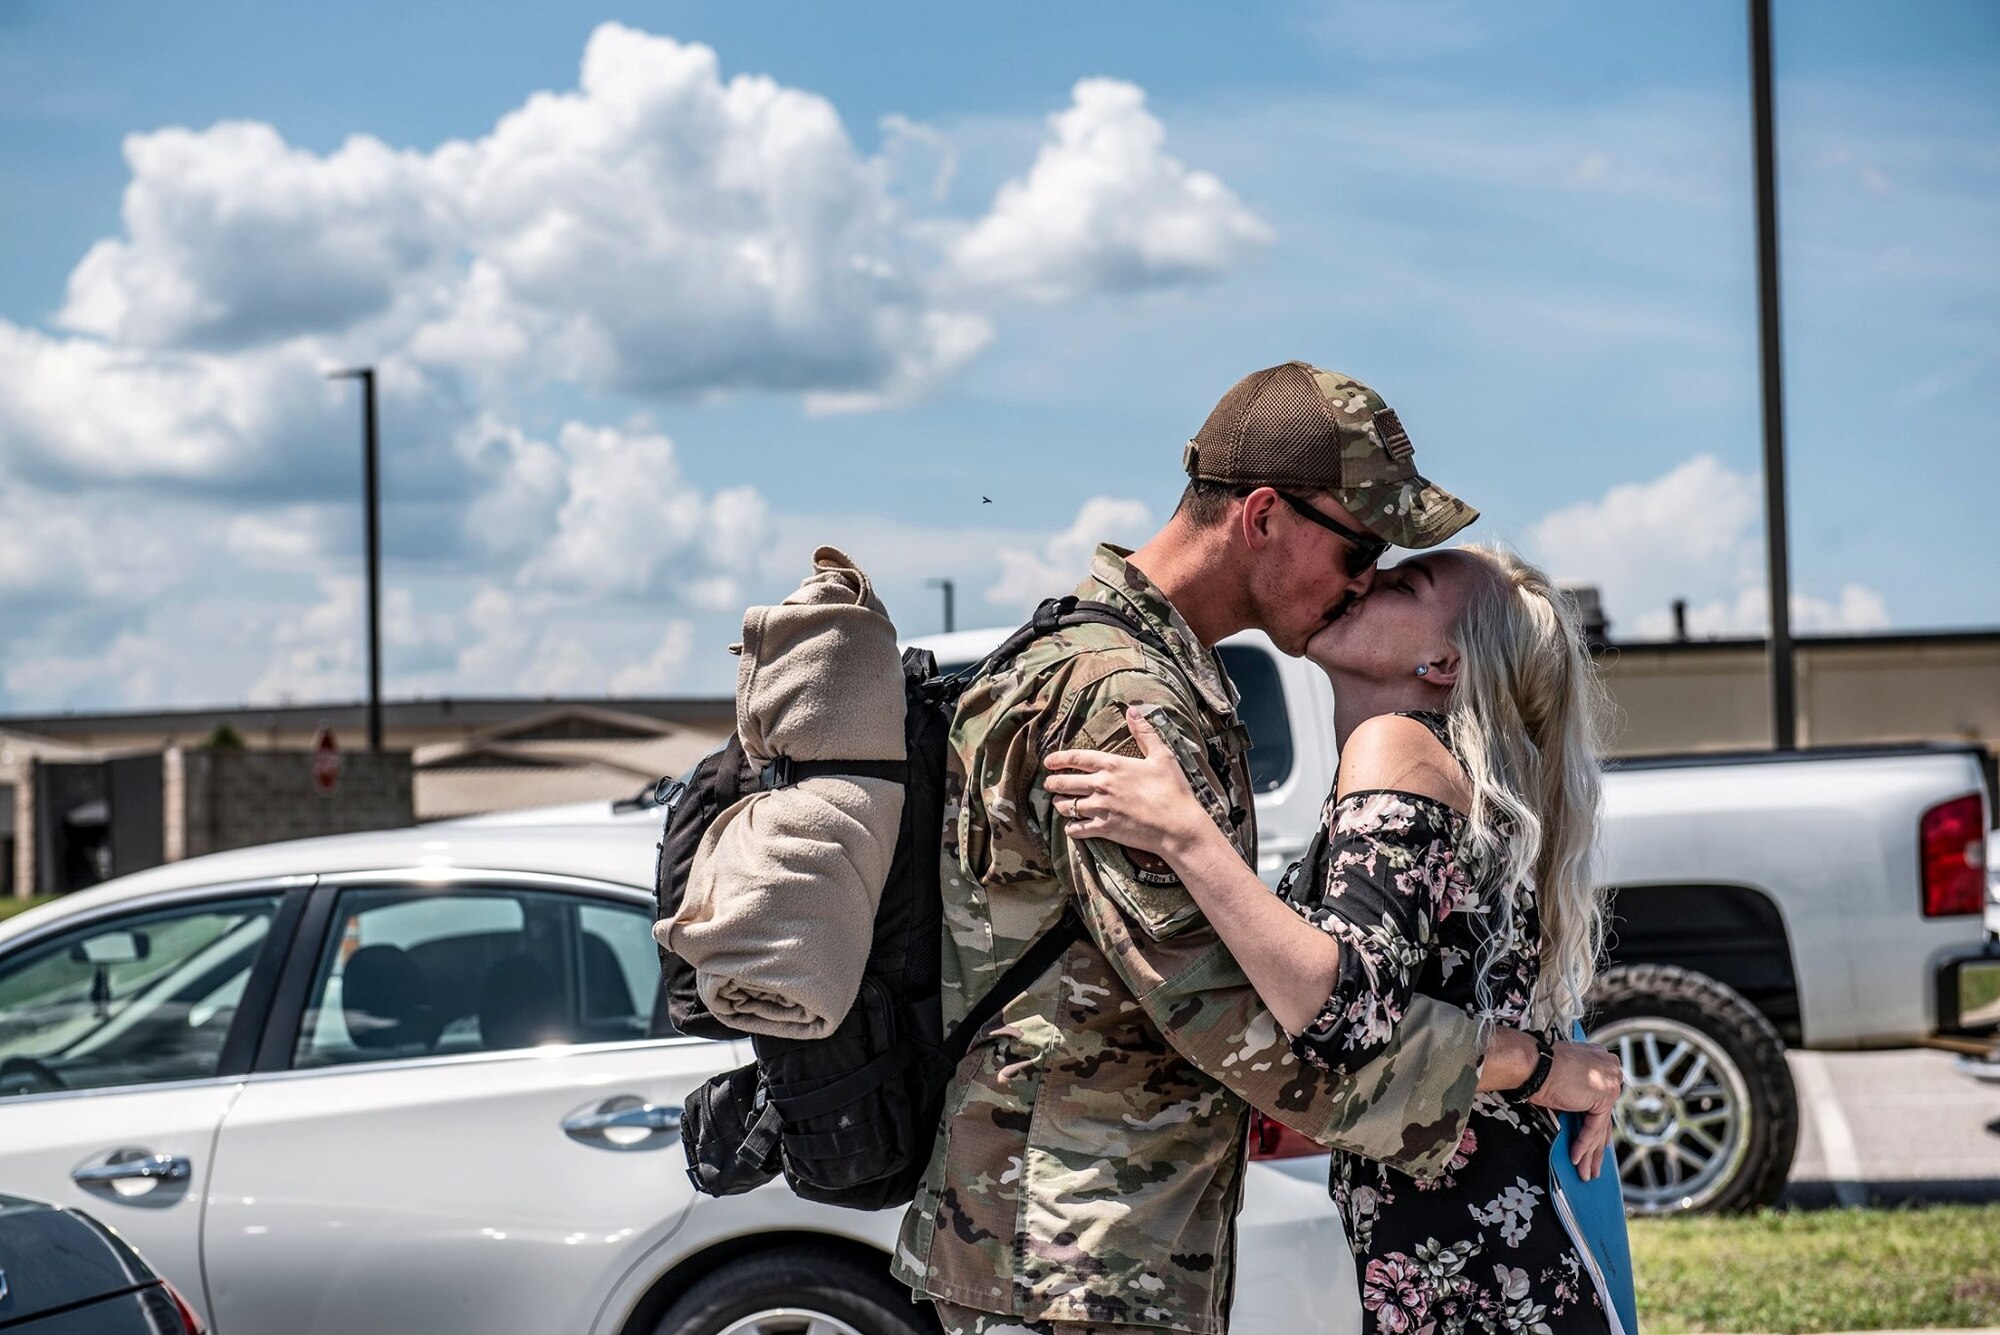 Photo of a service member kissing his spouse in a parking lot.